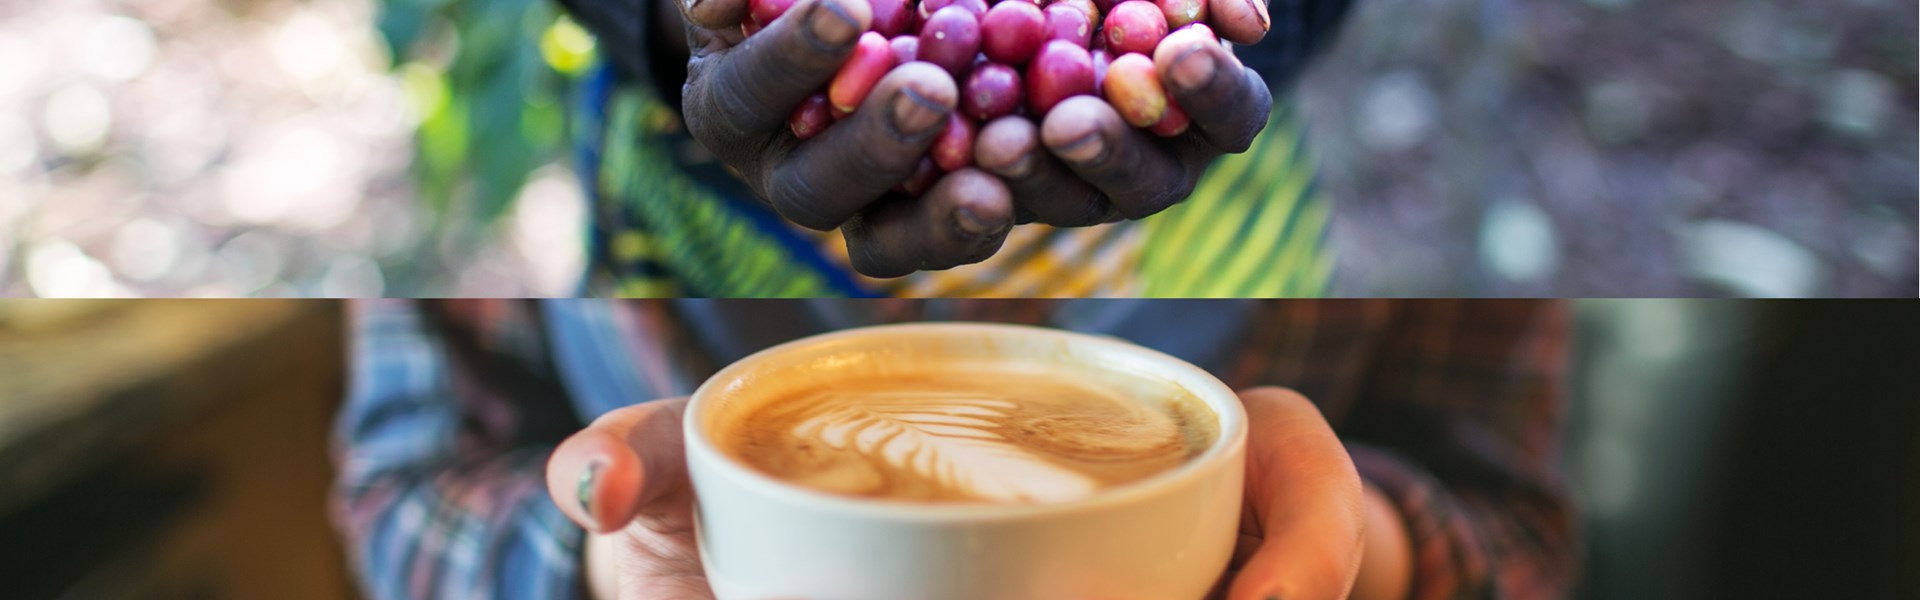 Land of a Thousand Hills Coffee - Creating Lasting Change By Doing Good